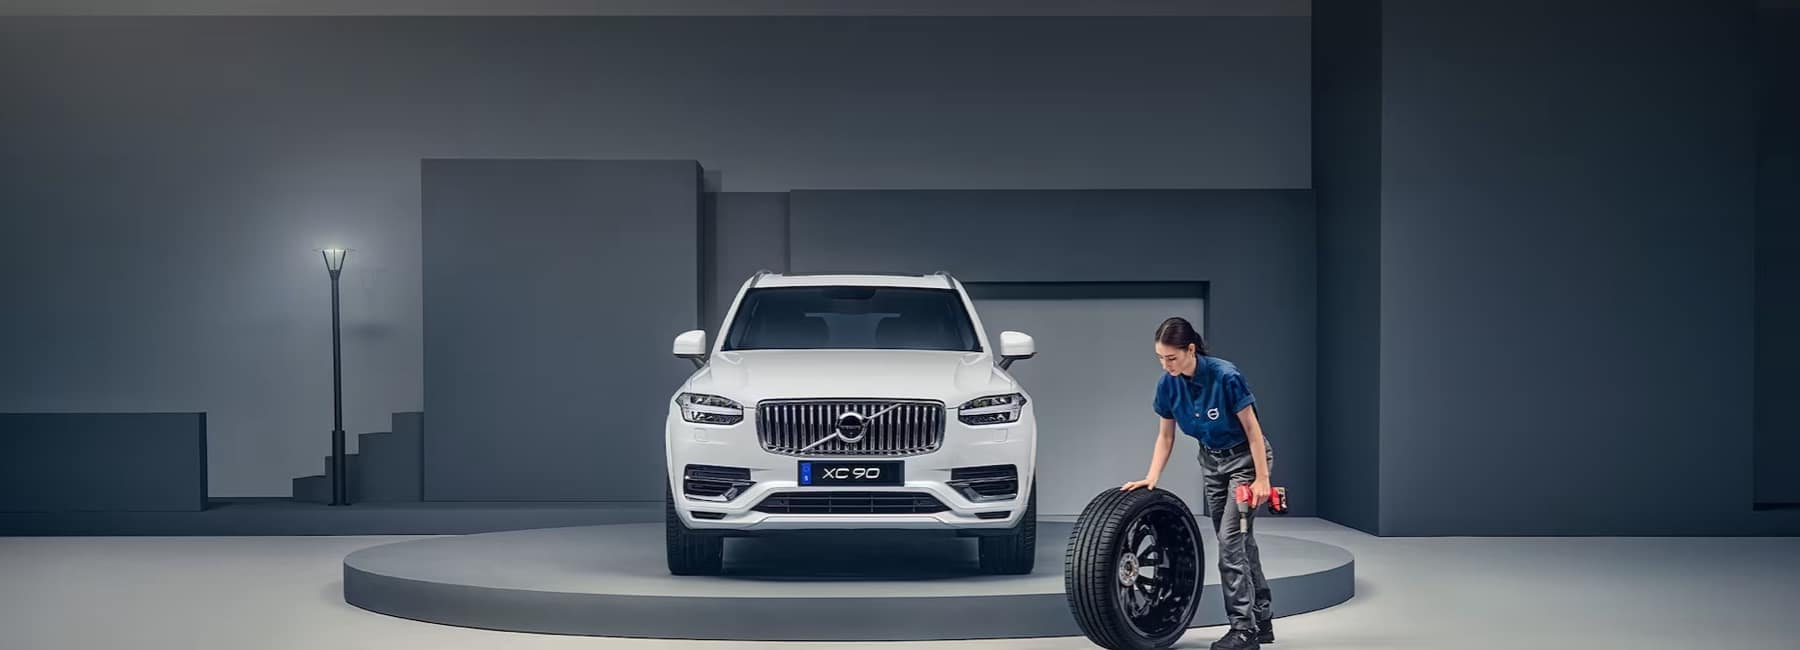 volvo-technician-rolls-tire-to-replace on XC90